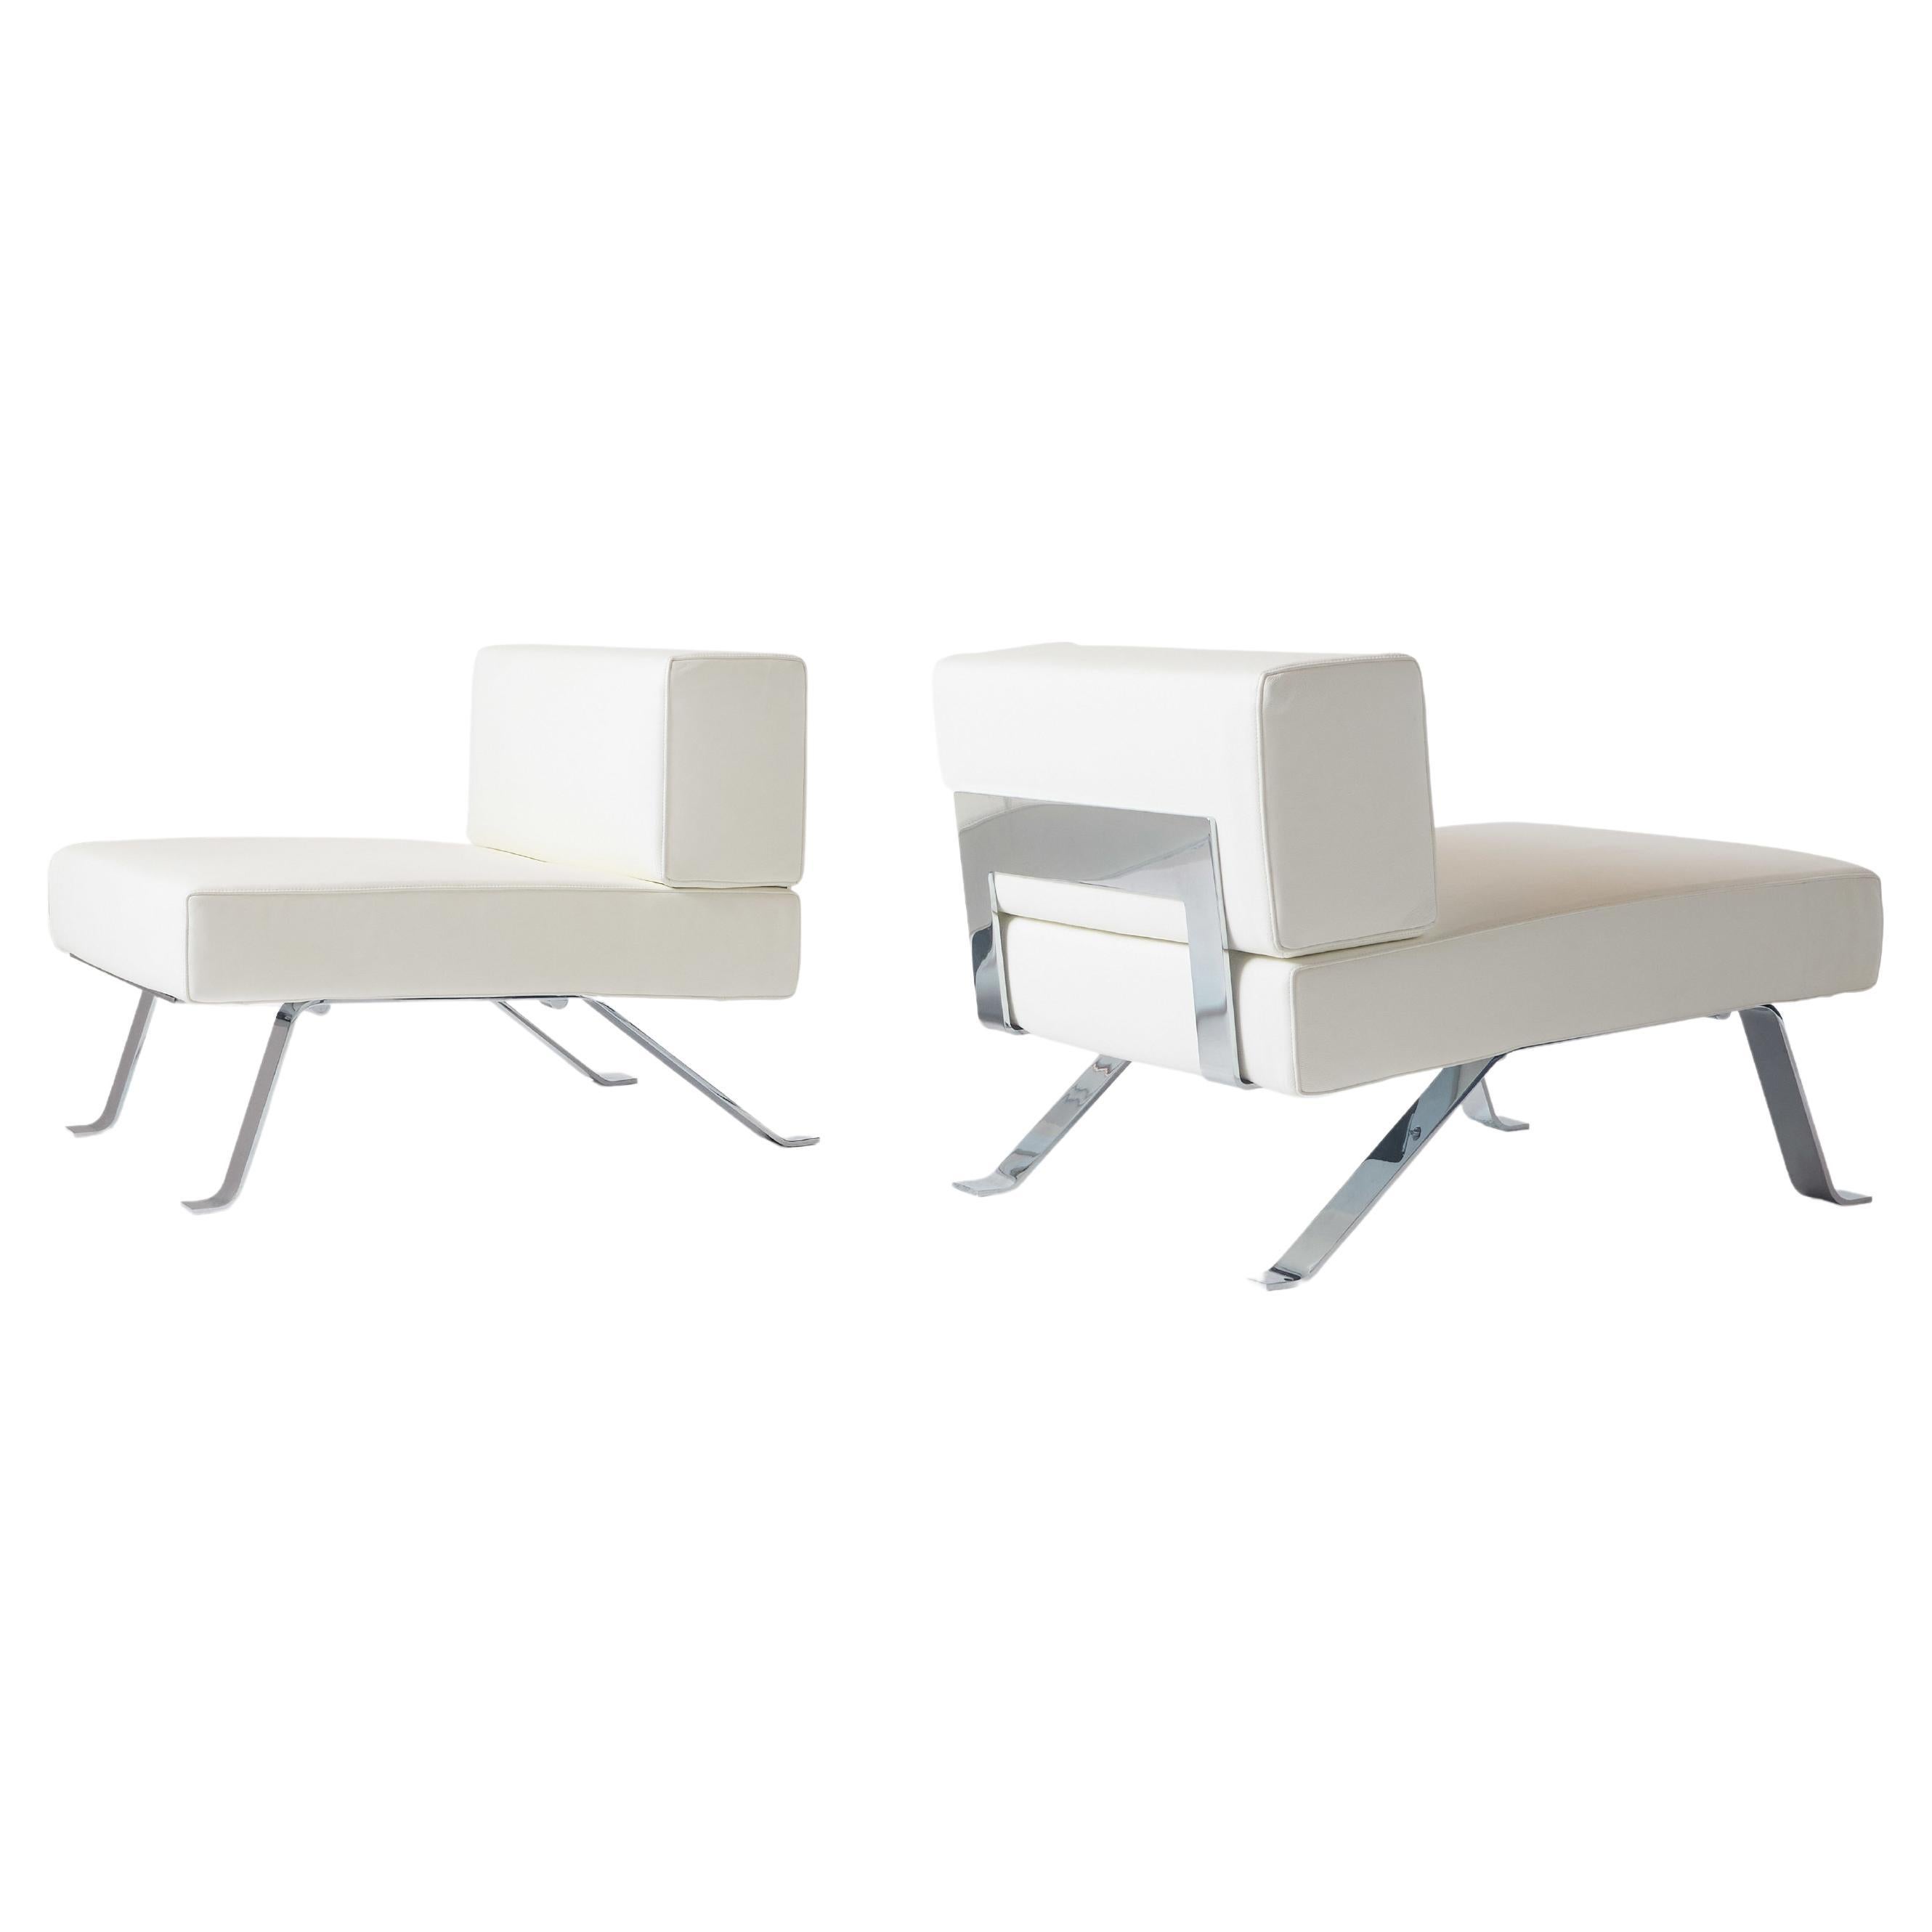 Pair of Ombra Lounge Chairs by Charlotte Perriand for Cassina For Sale